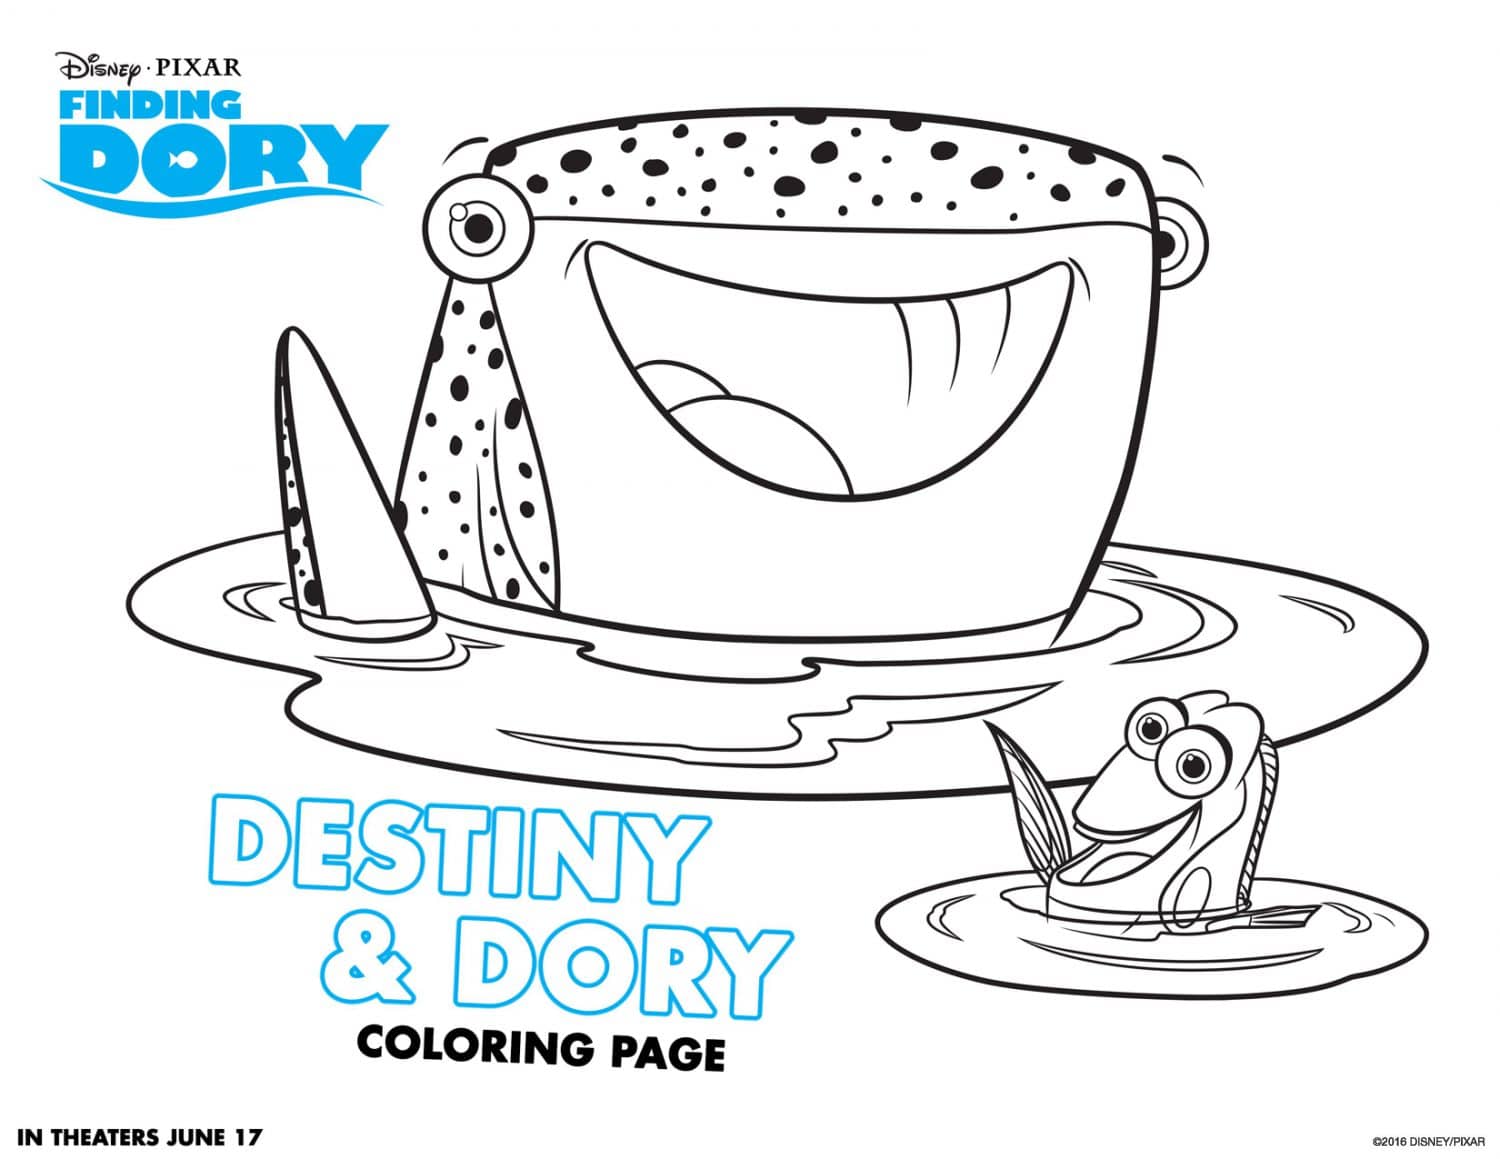 Finding Dory Coloring Pages and Activity Sheets Crazy Adventures in